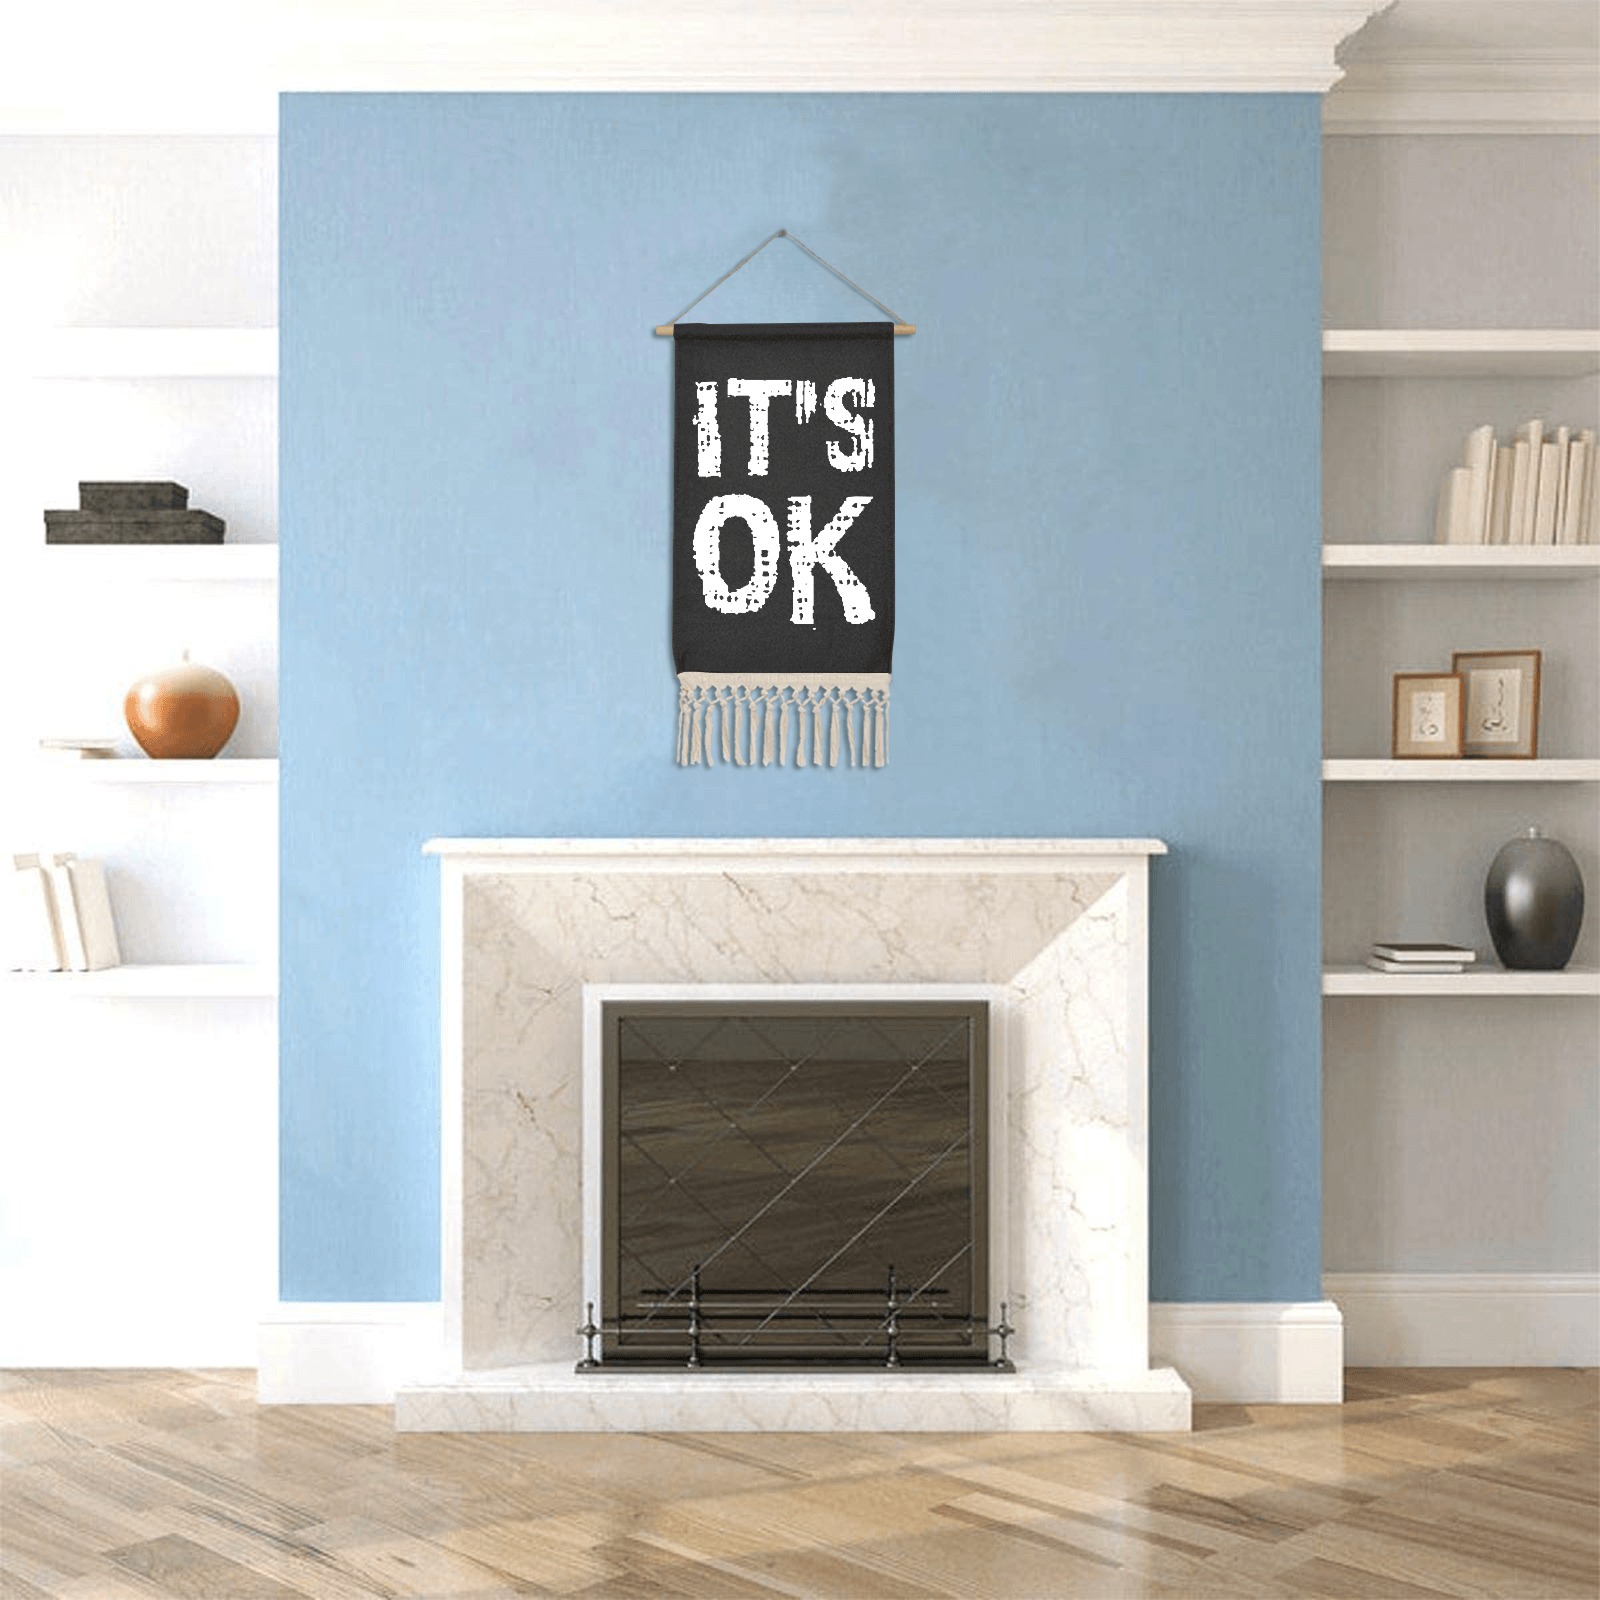 It is OK inspirational white text. Linen Hanging Poster